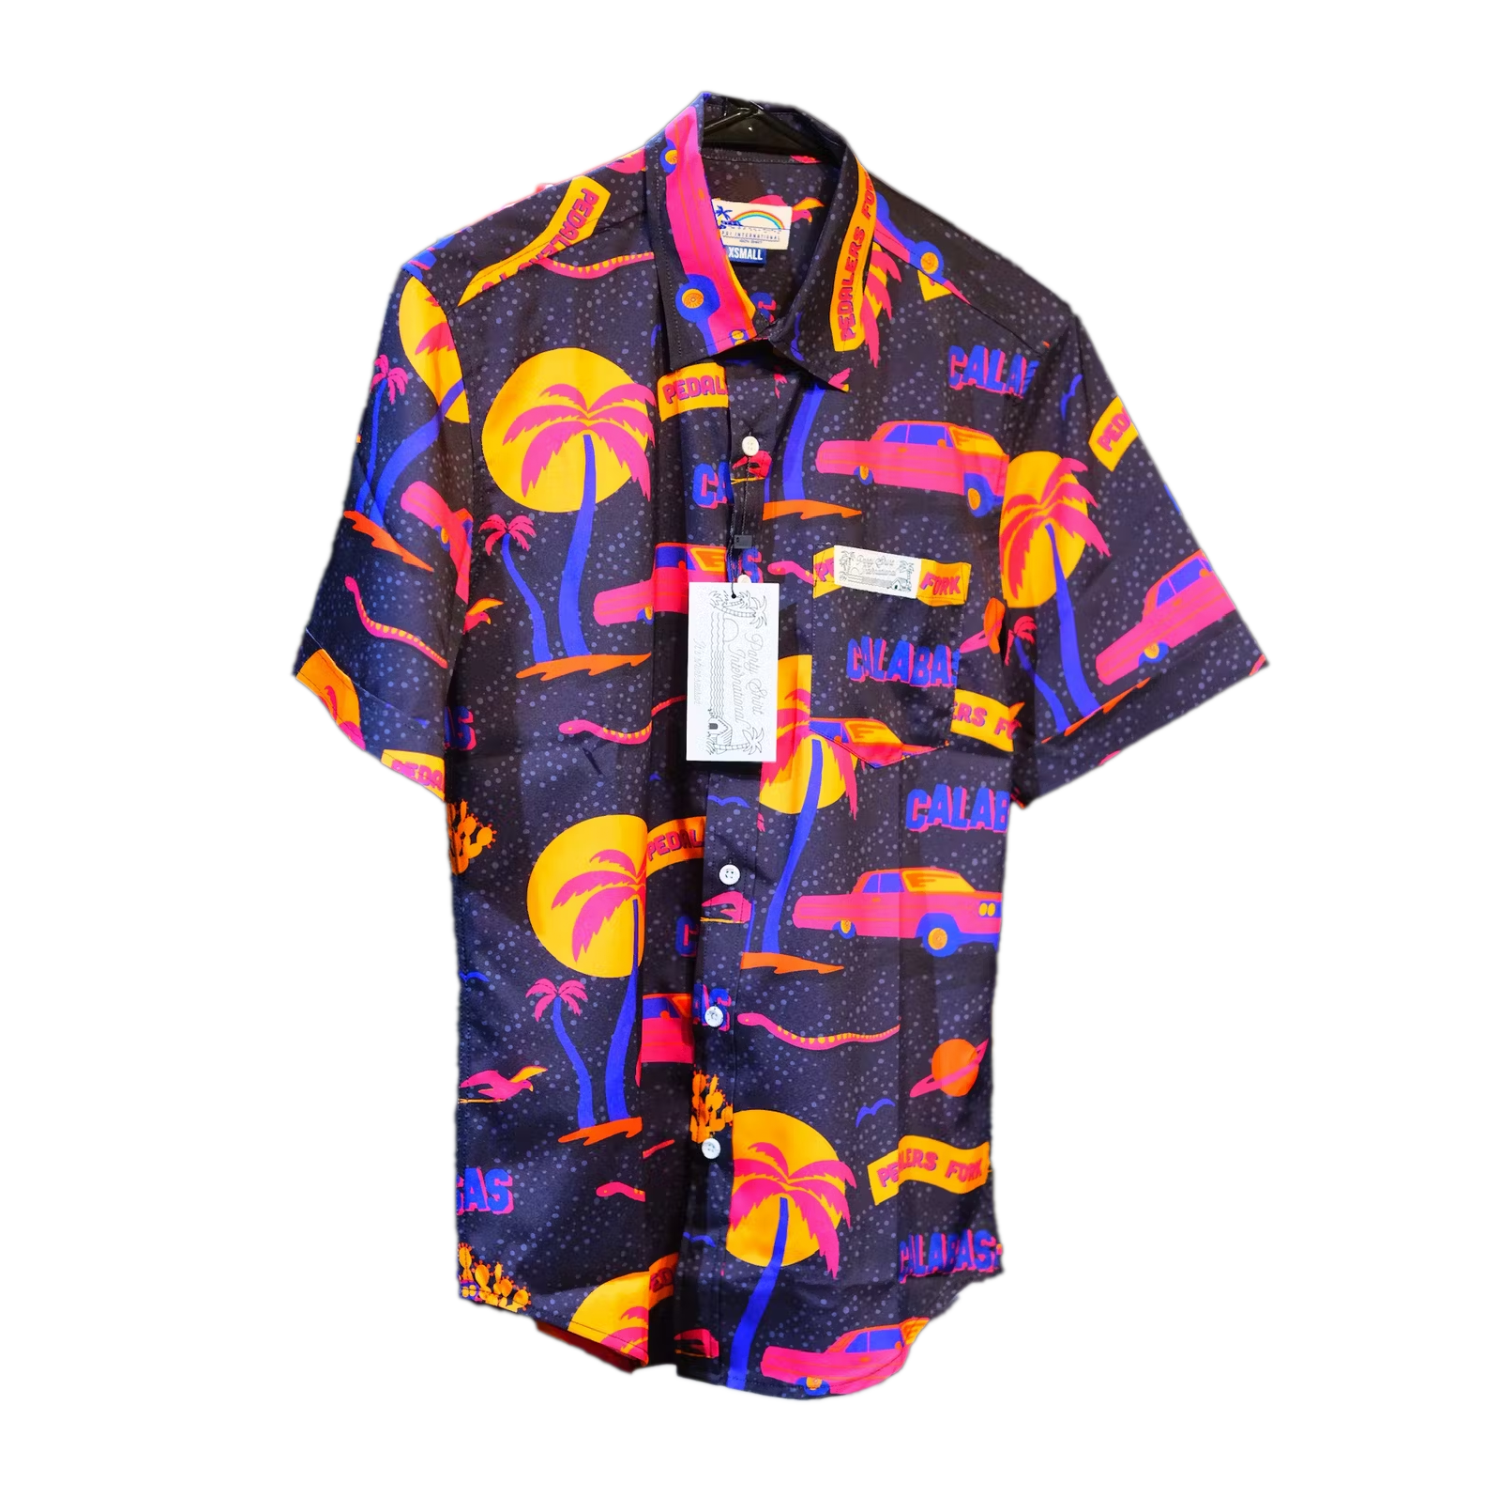 Party shirt with graphics of cars and palm trees